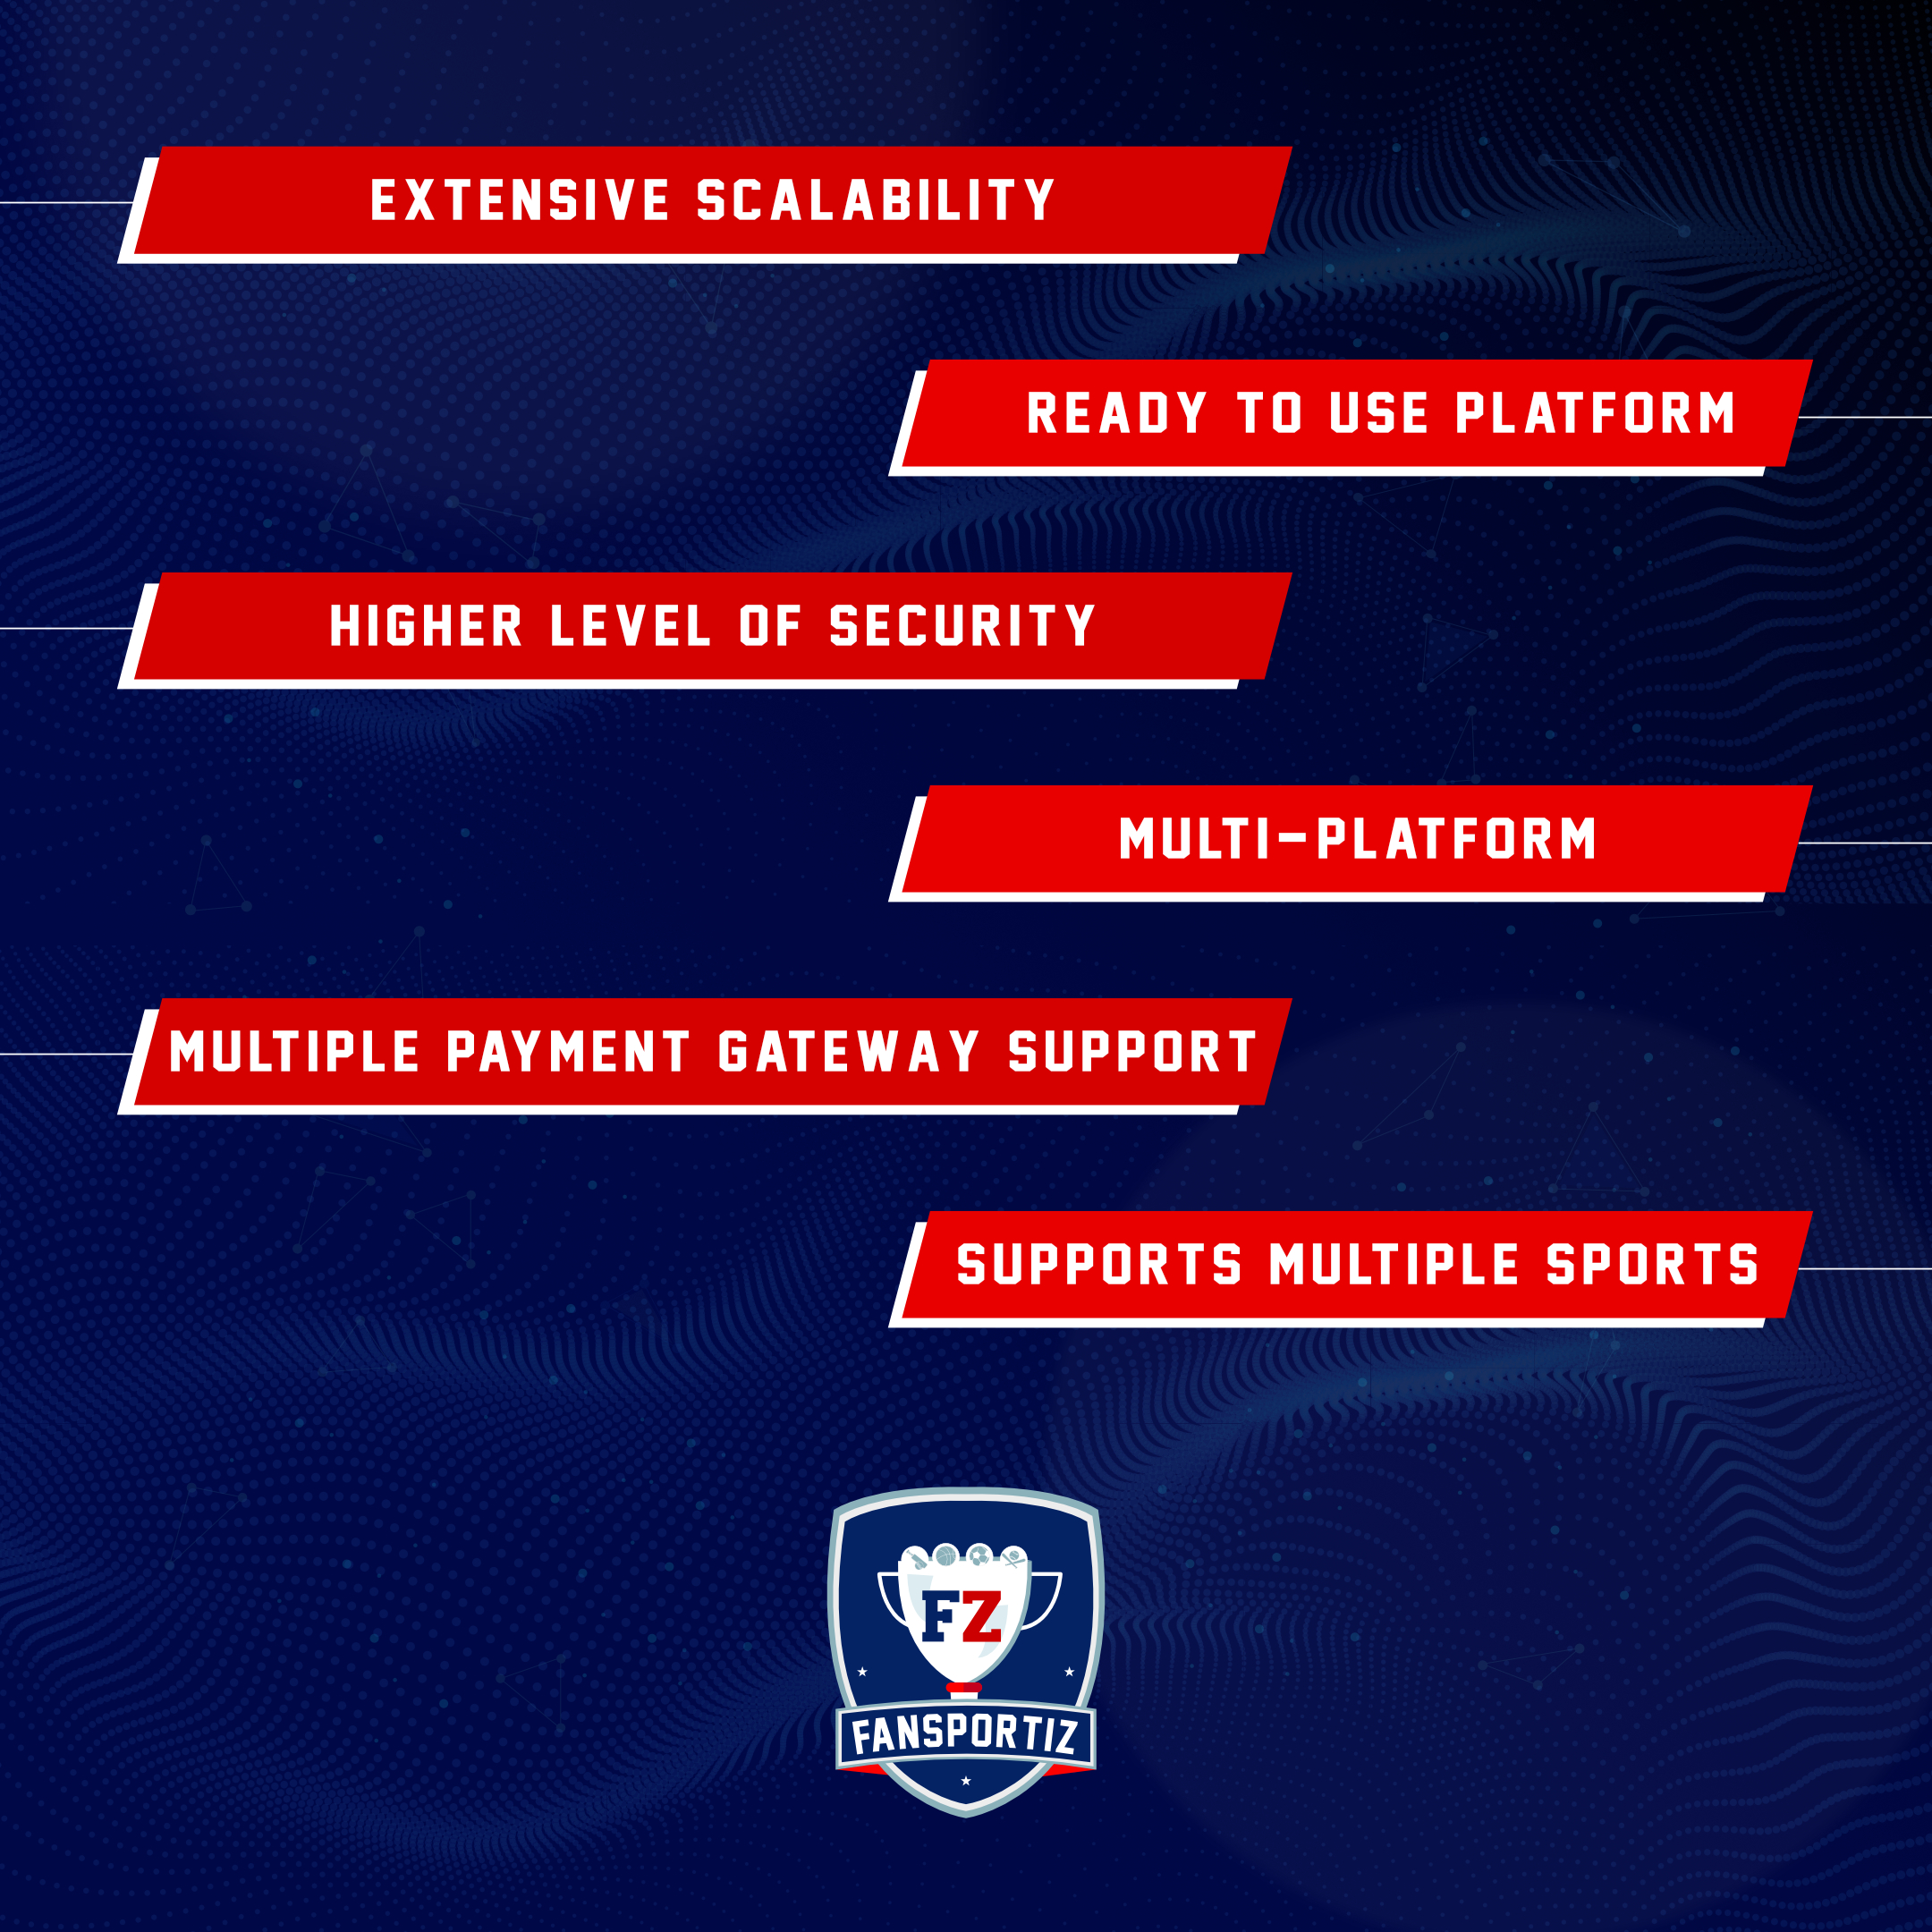 > EXTENSIVE SCALABILITY
/ READY TO USE PLATFORM
| HIGHER LEVEL OF SECURITY
MULTI-PLATFORM
[MULTIPLE PAYMENT GATEWAY SUPPORT
/ SUPPORTS MULTIPLE SPORTS